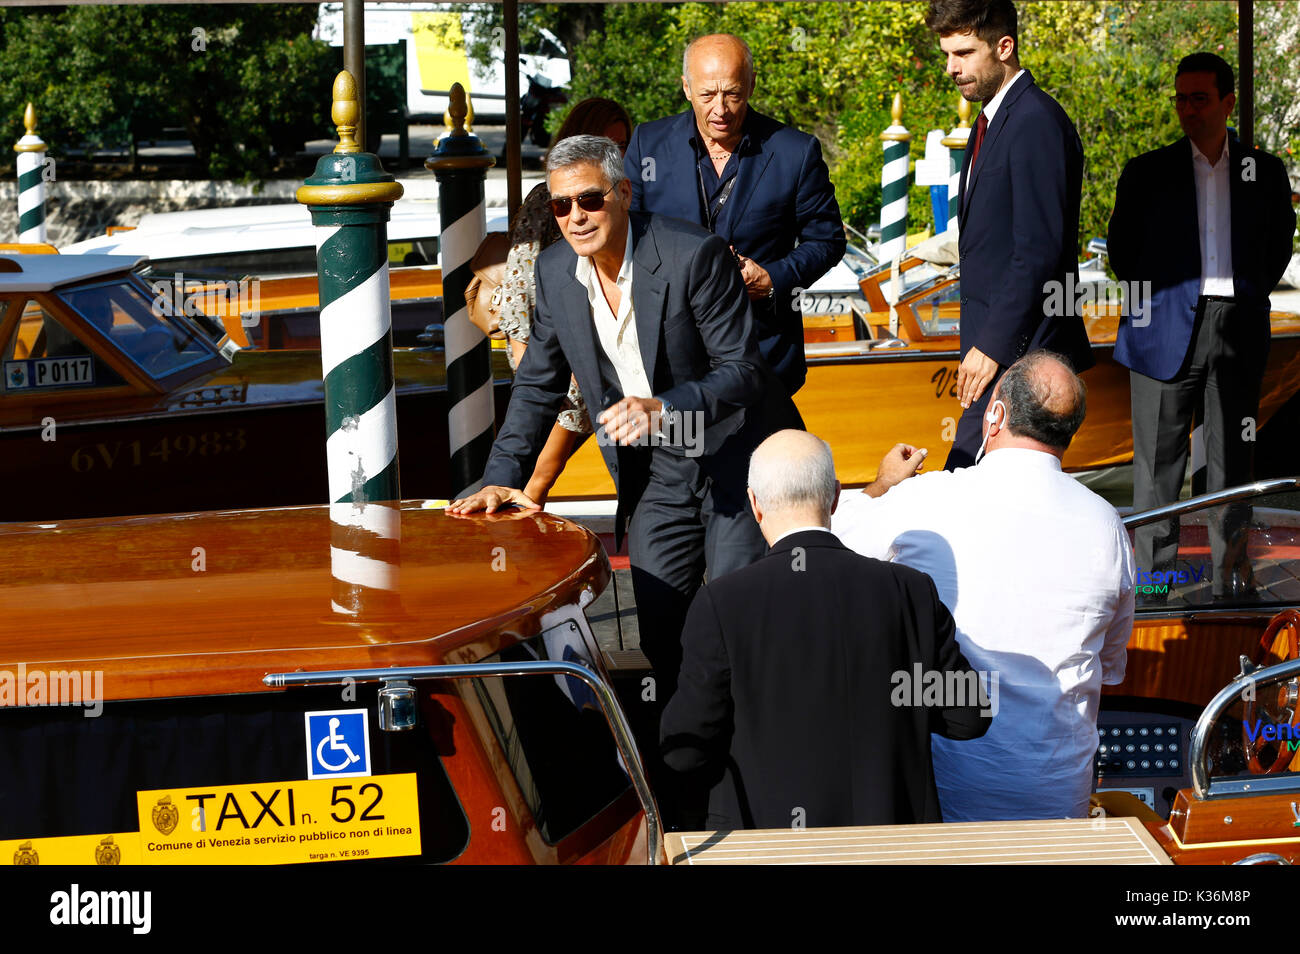 Venice, Italy. 01st Sep, 2017. George Clooney is seen leaving the Hotel Excelsior after giving interviews during the 74th Venice Film Festival on September 01, 2017 in Venice, Italy Credit: Geisler-Fotopress/Alamy Live News Stock Photo